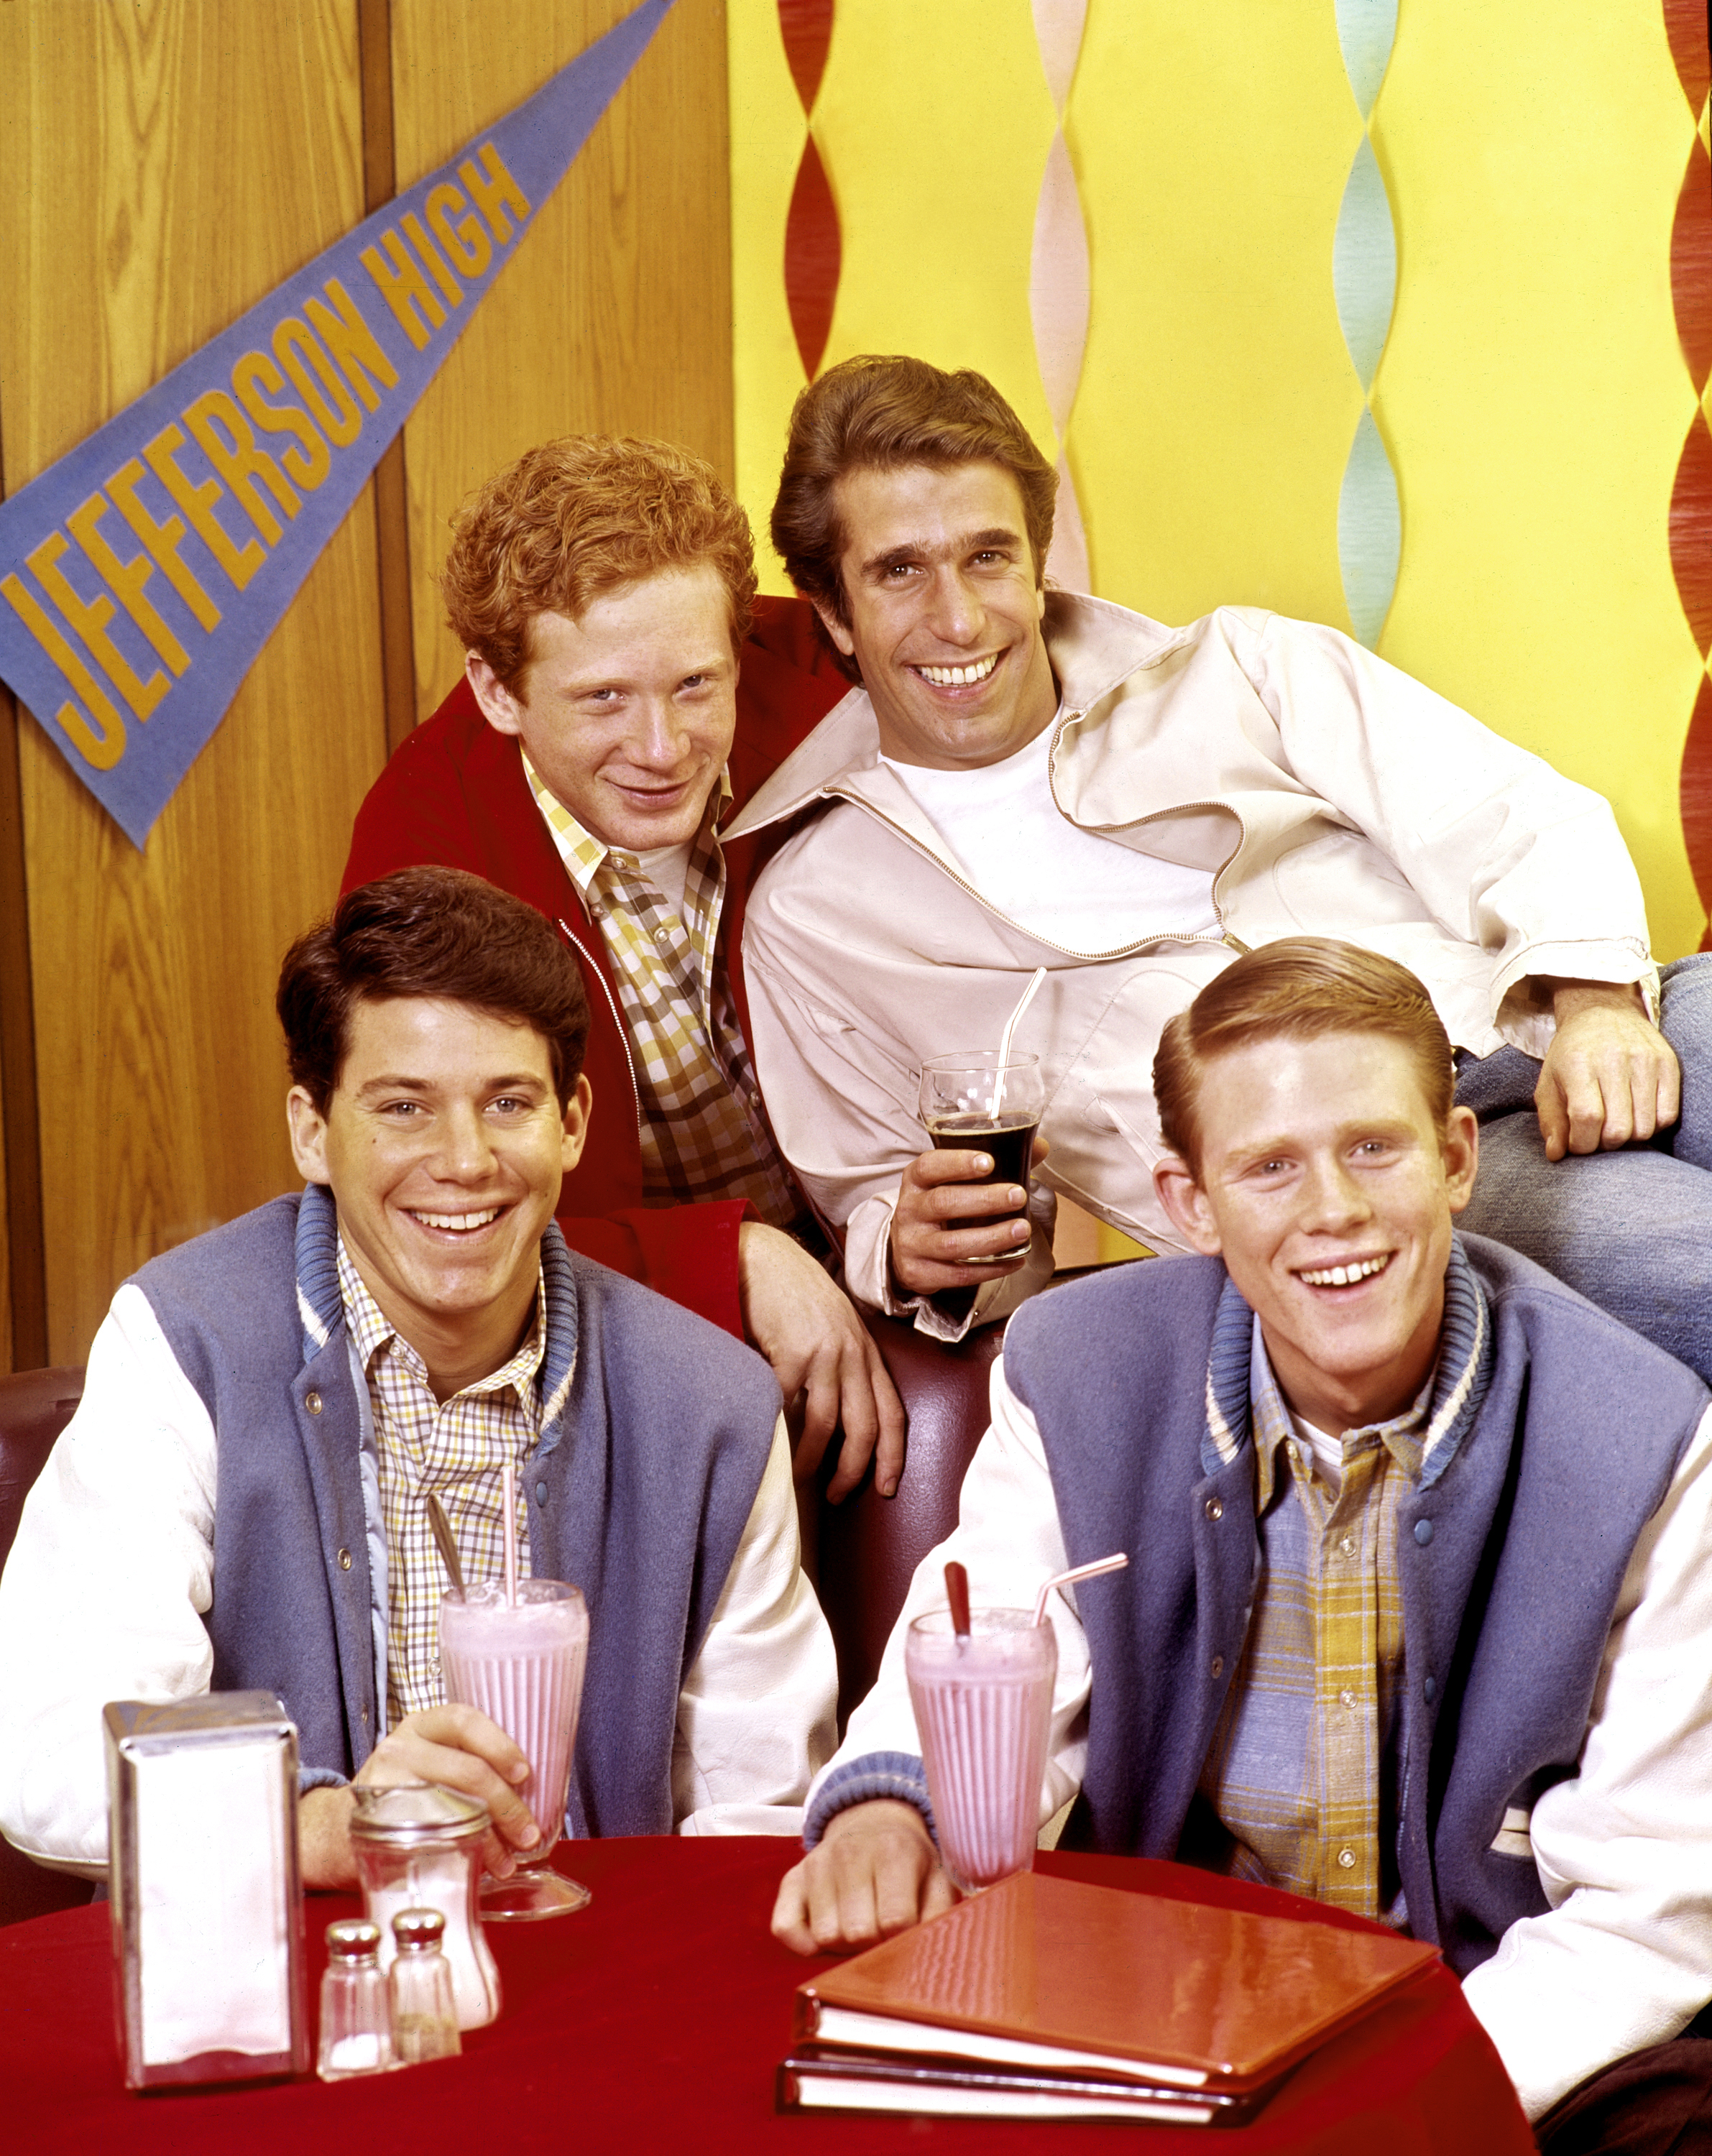 Ron Howard, Anson Williams, Donny Most, and Henry Winkler for "Happy Days"in 1974. | Source: Getty Images